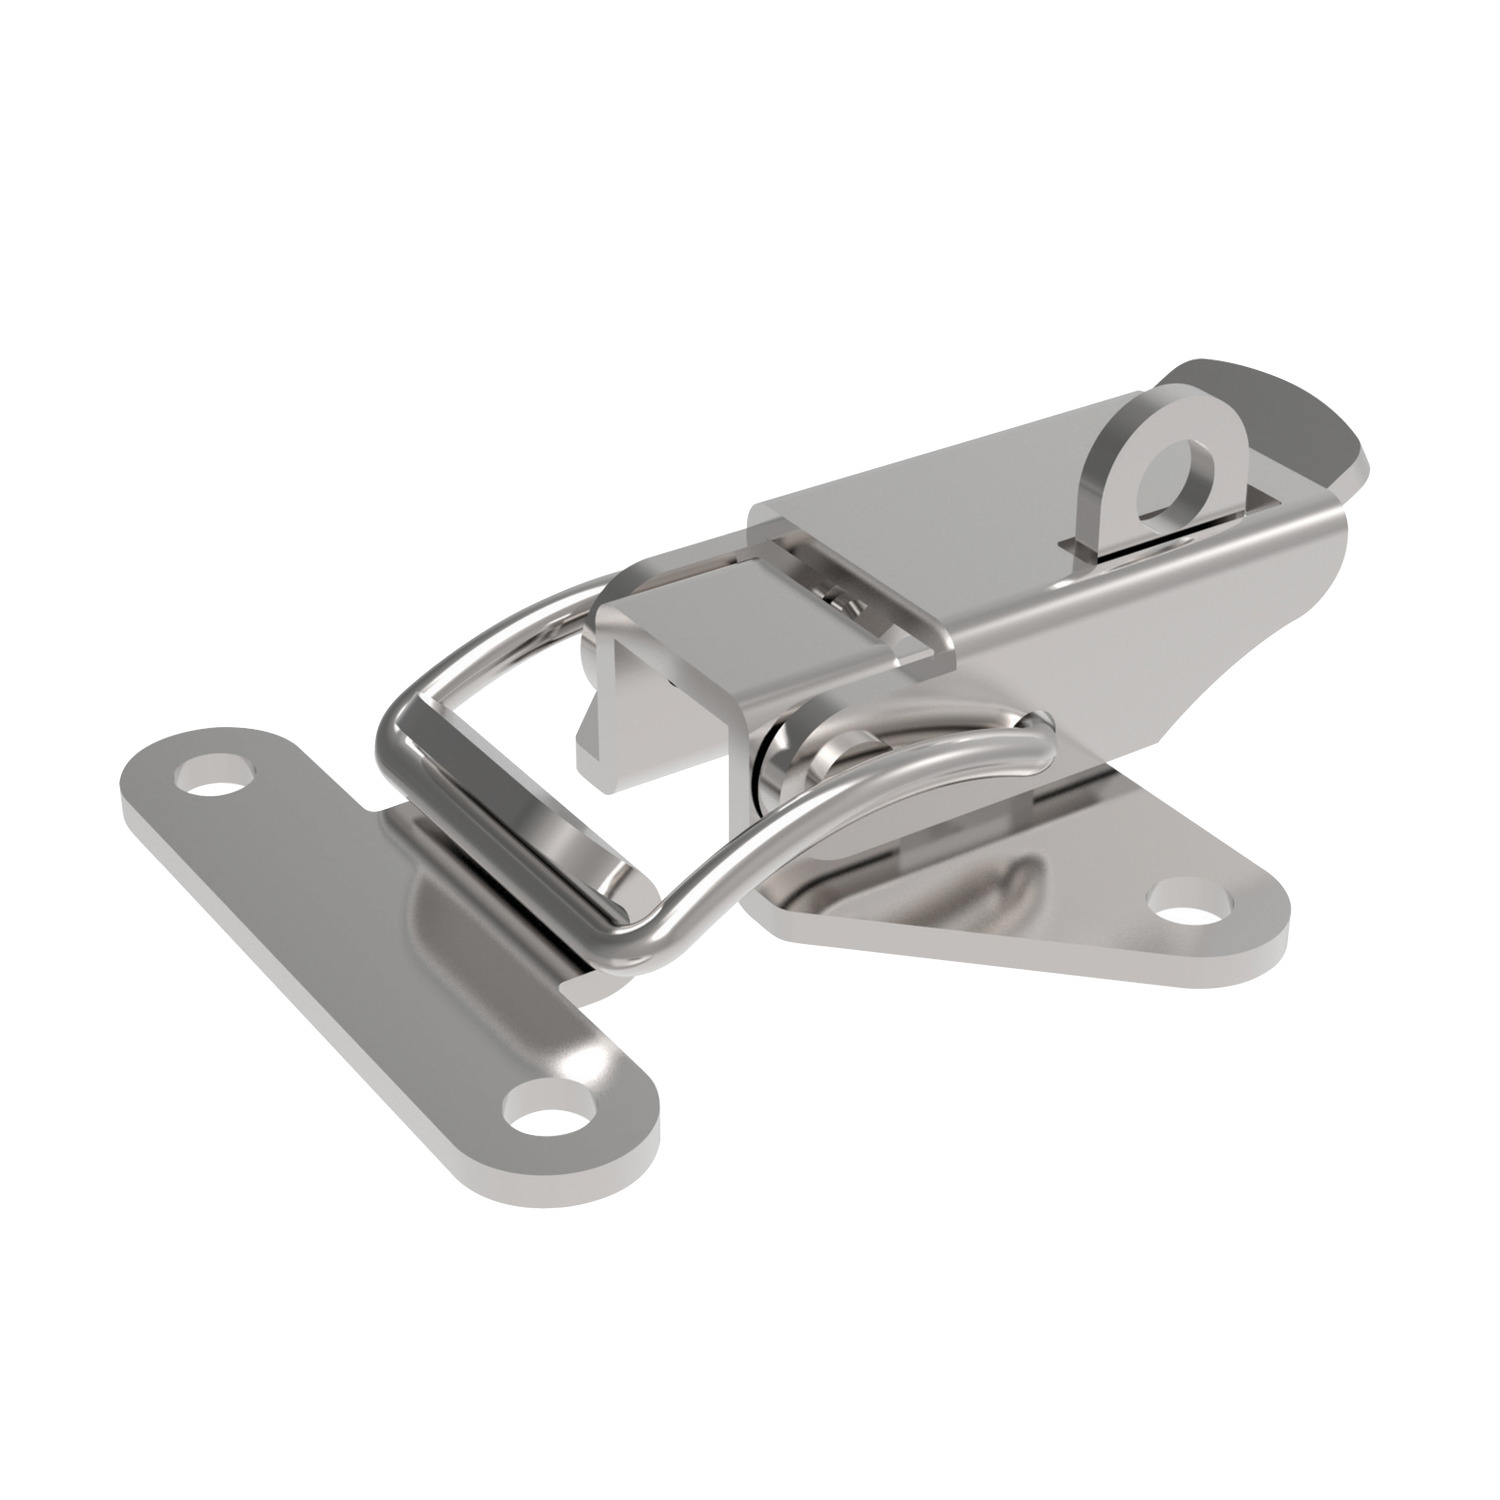 Toggle Latches Nickel or steel plated toggle latch with a padlock shackle mechanism. Supplied with counterstrike.